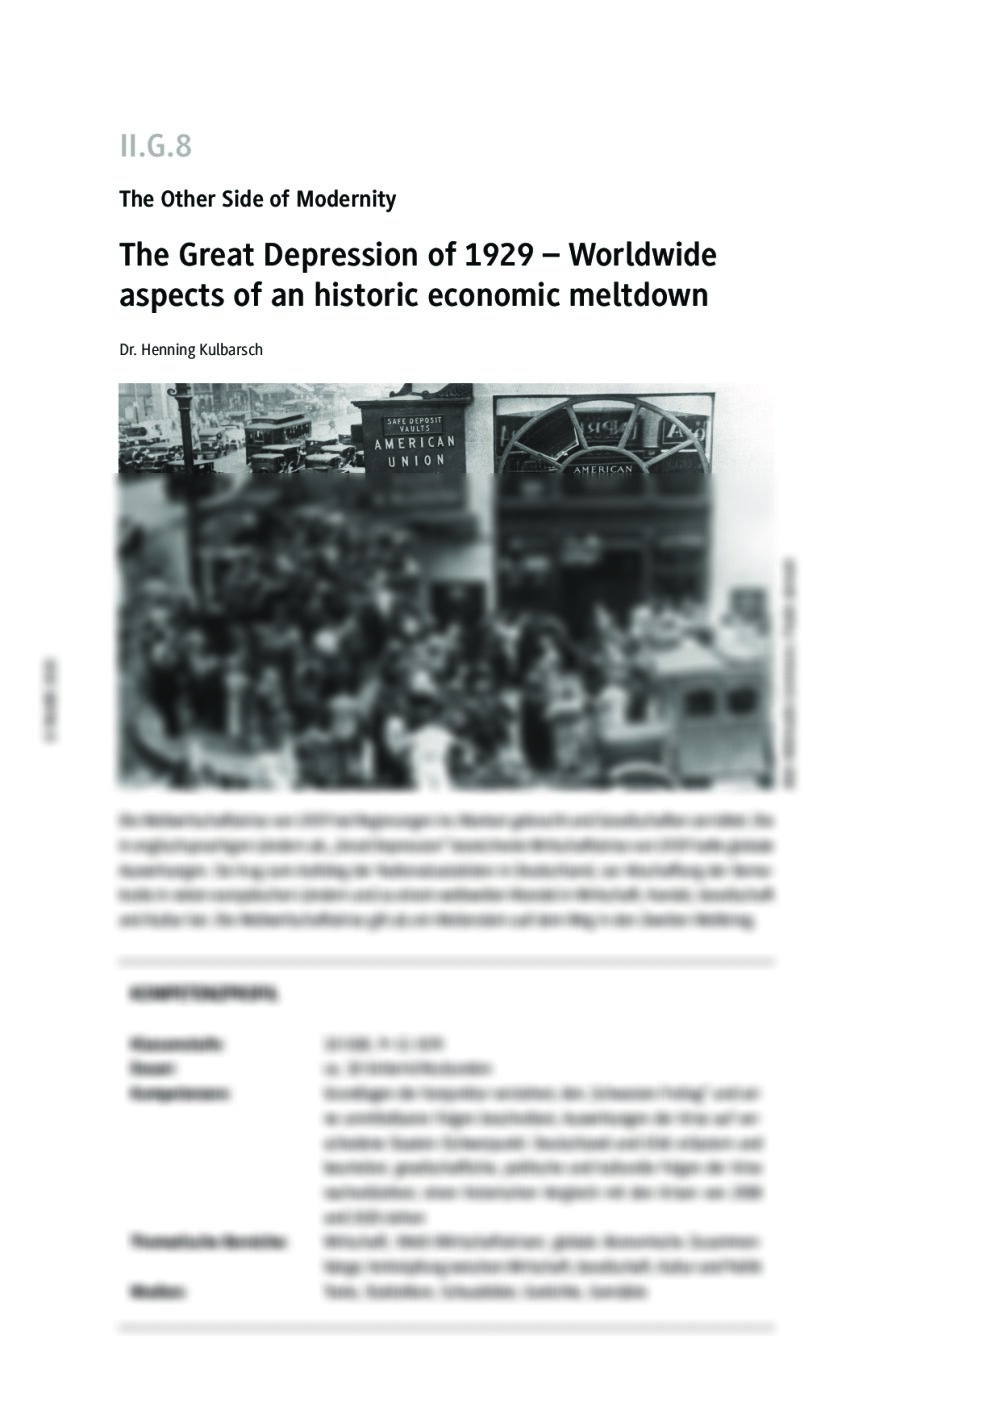 The Great Depression of 1929 - Seite 1